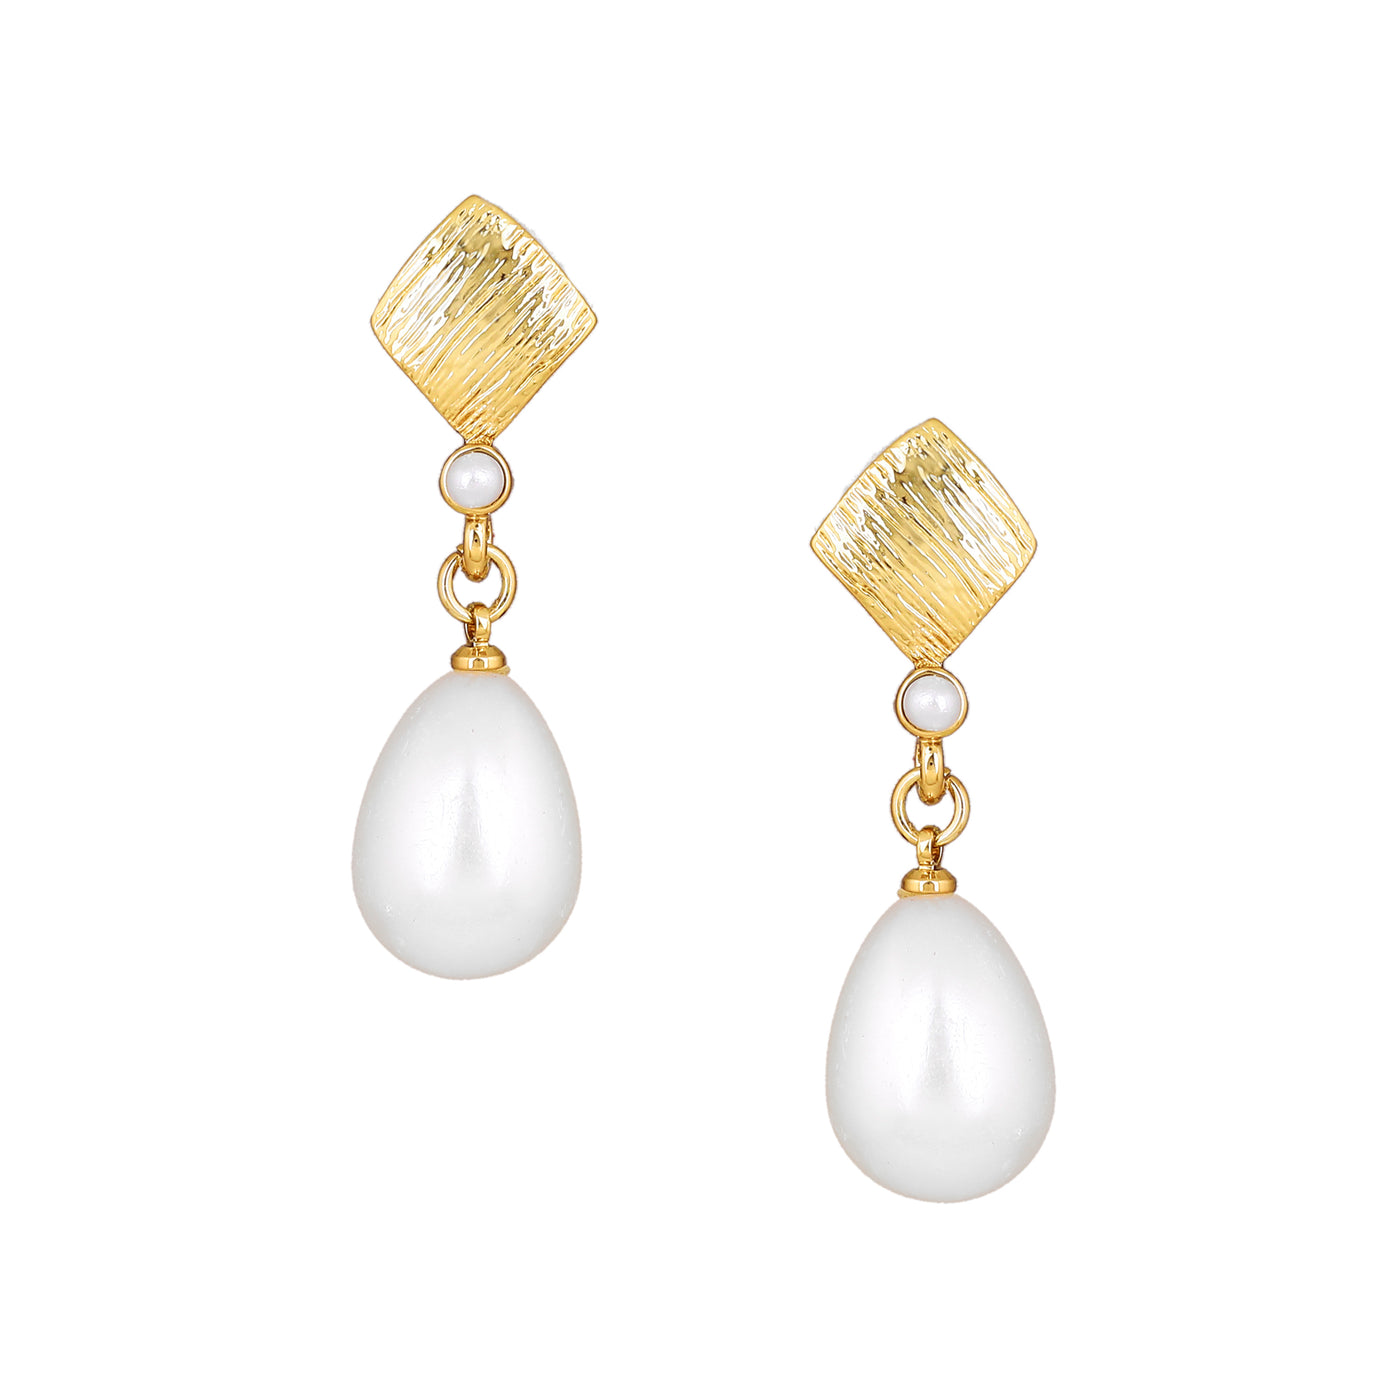 Estele Gold Plated Textured Pearl Drop Earrings for Girls and Women